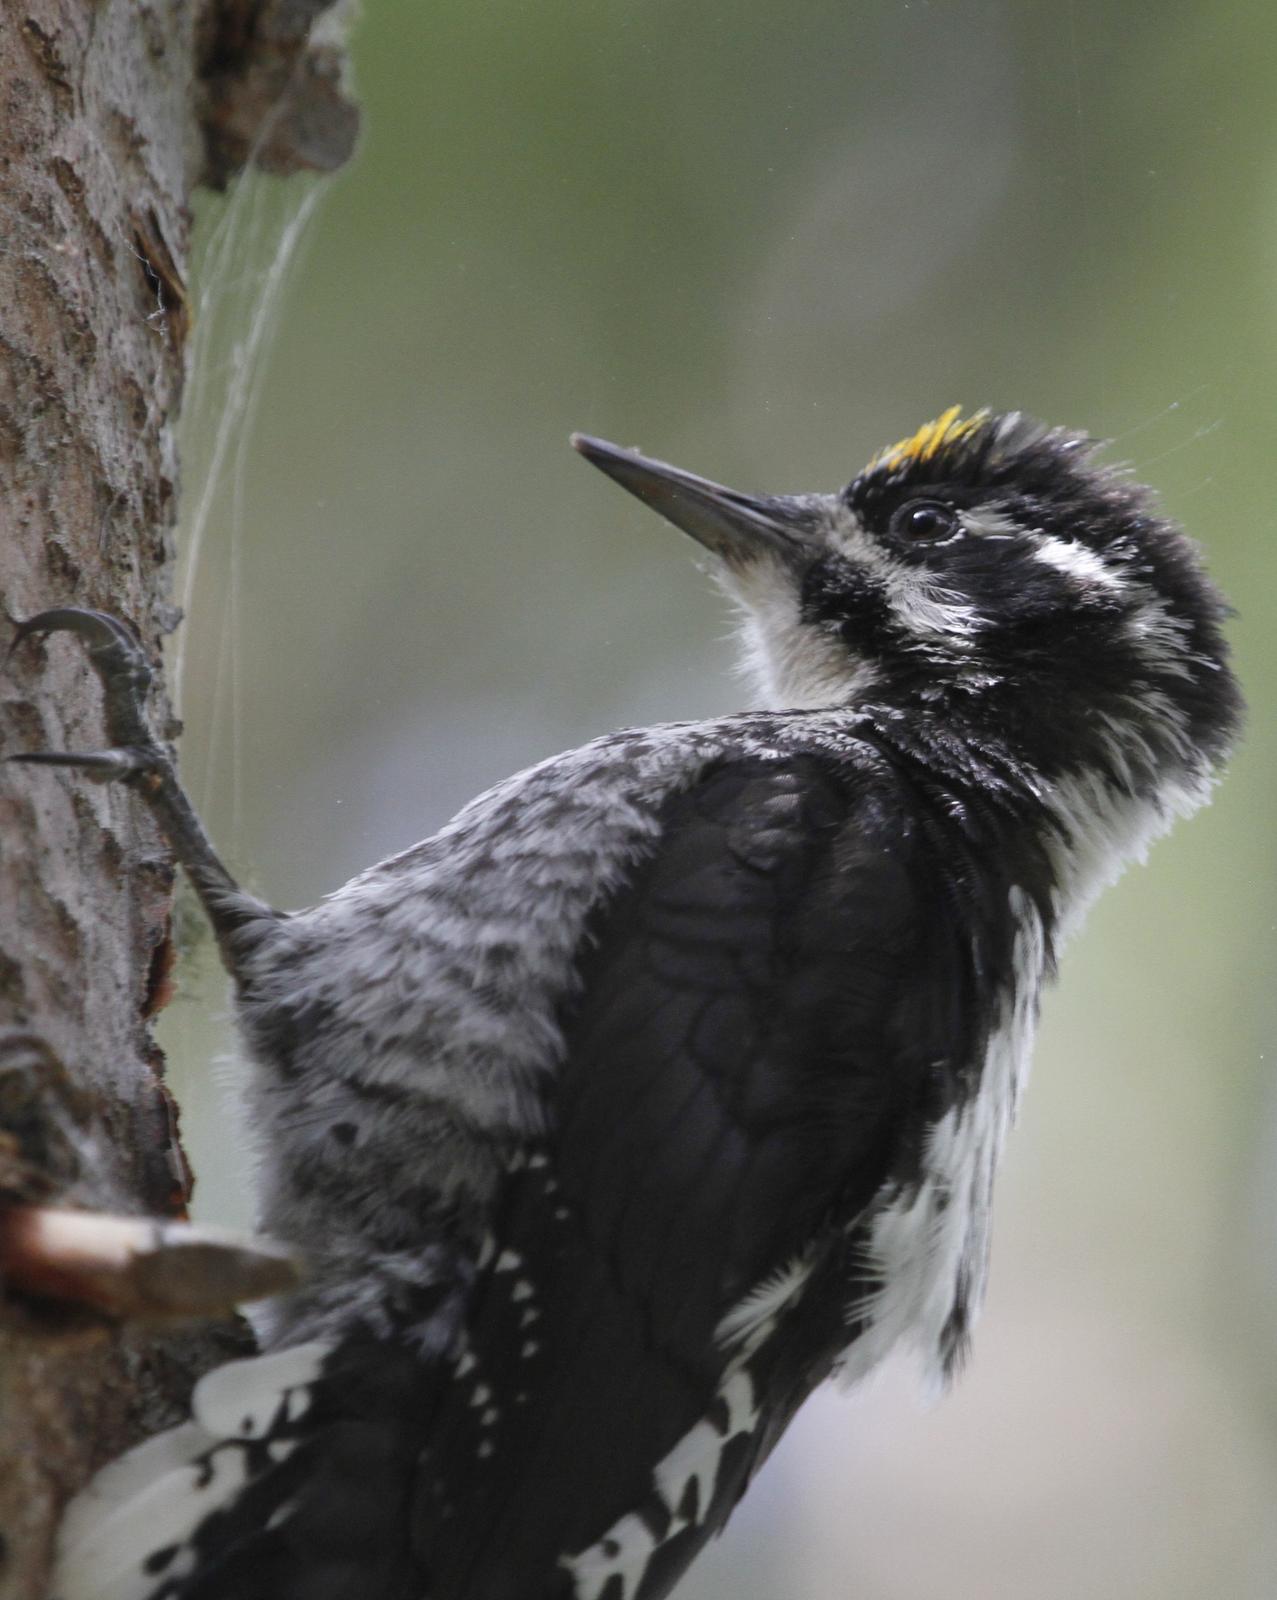 American Three-toed Woodpecker (Rocky Mts.) Photo by Isaac Sanchez